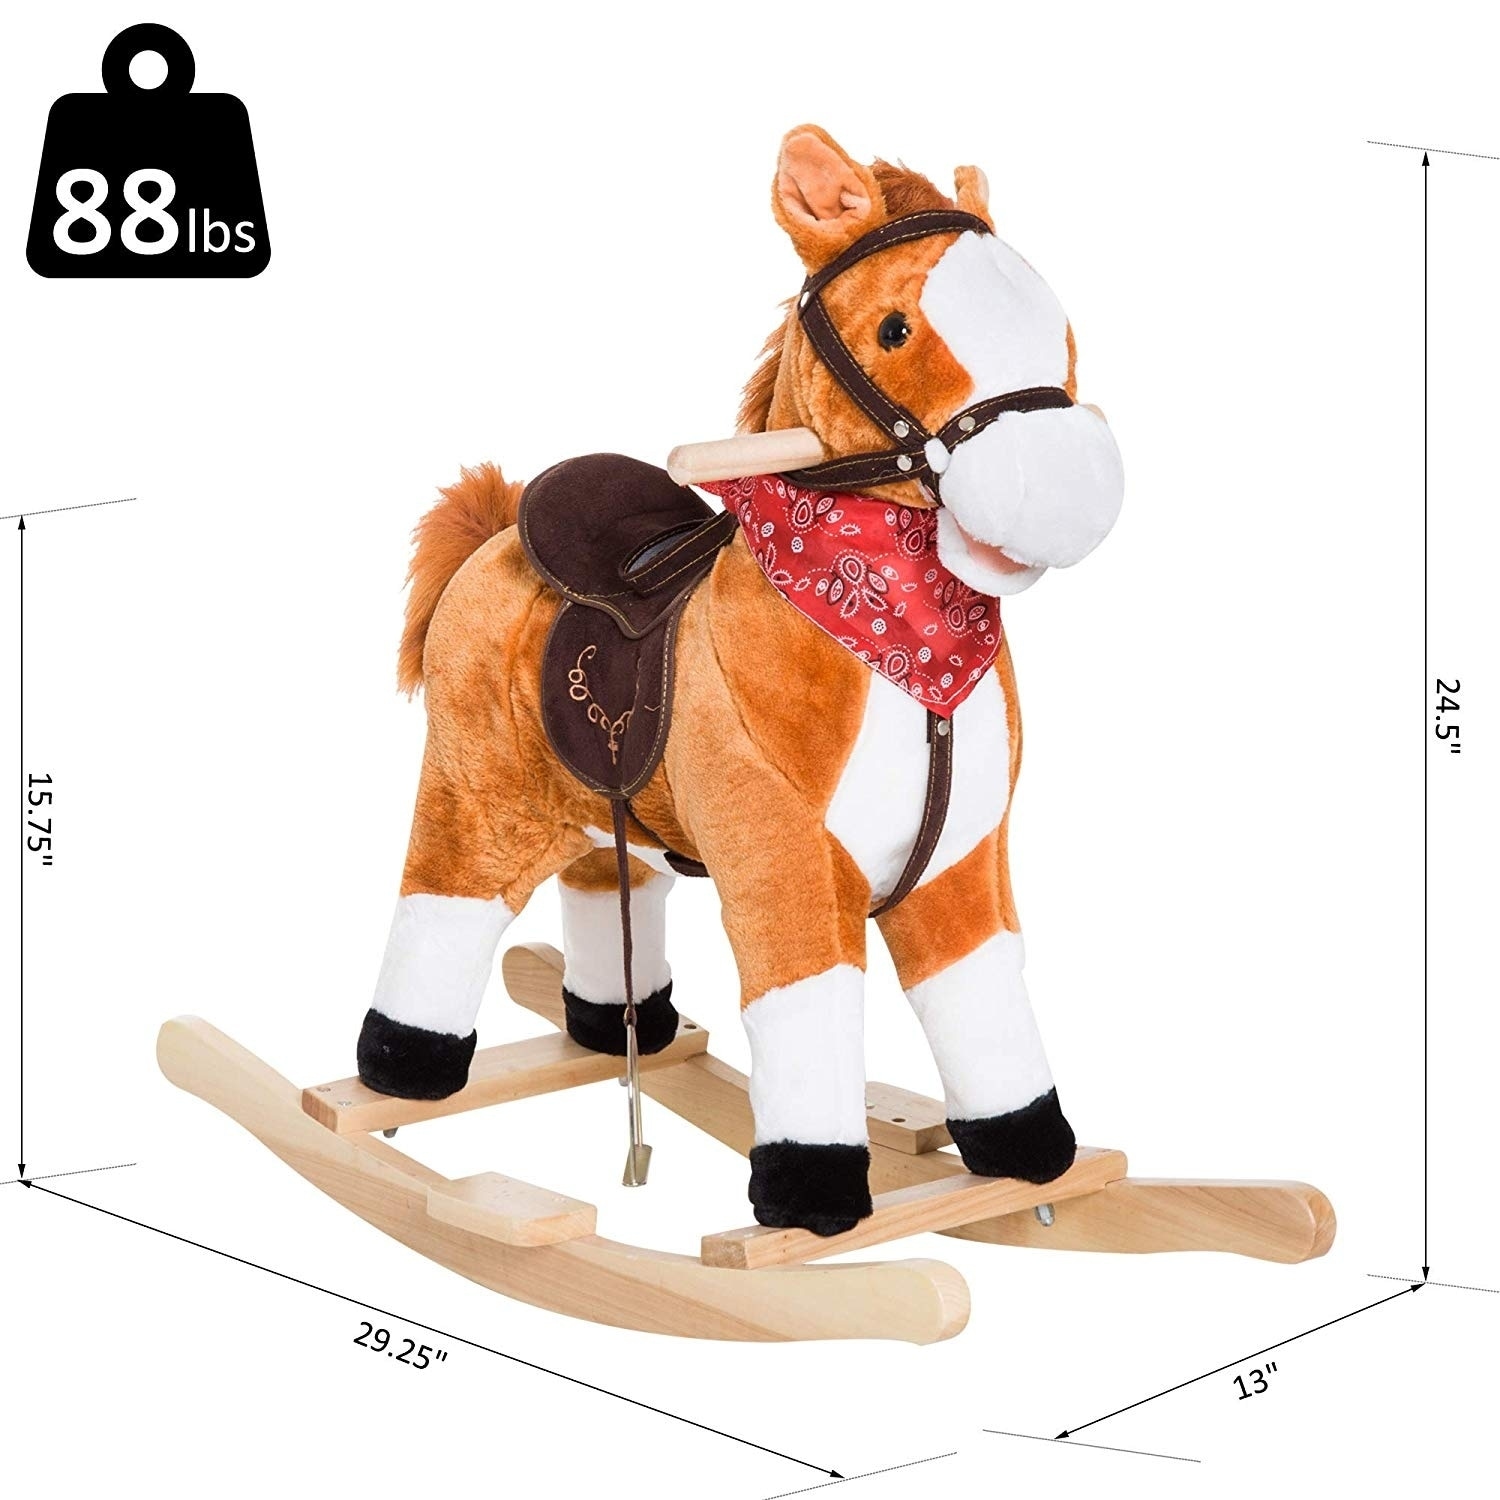 ride on toy horse that moves